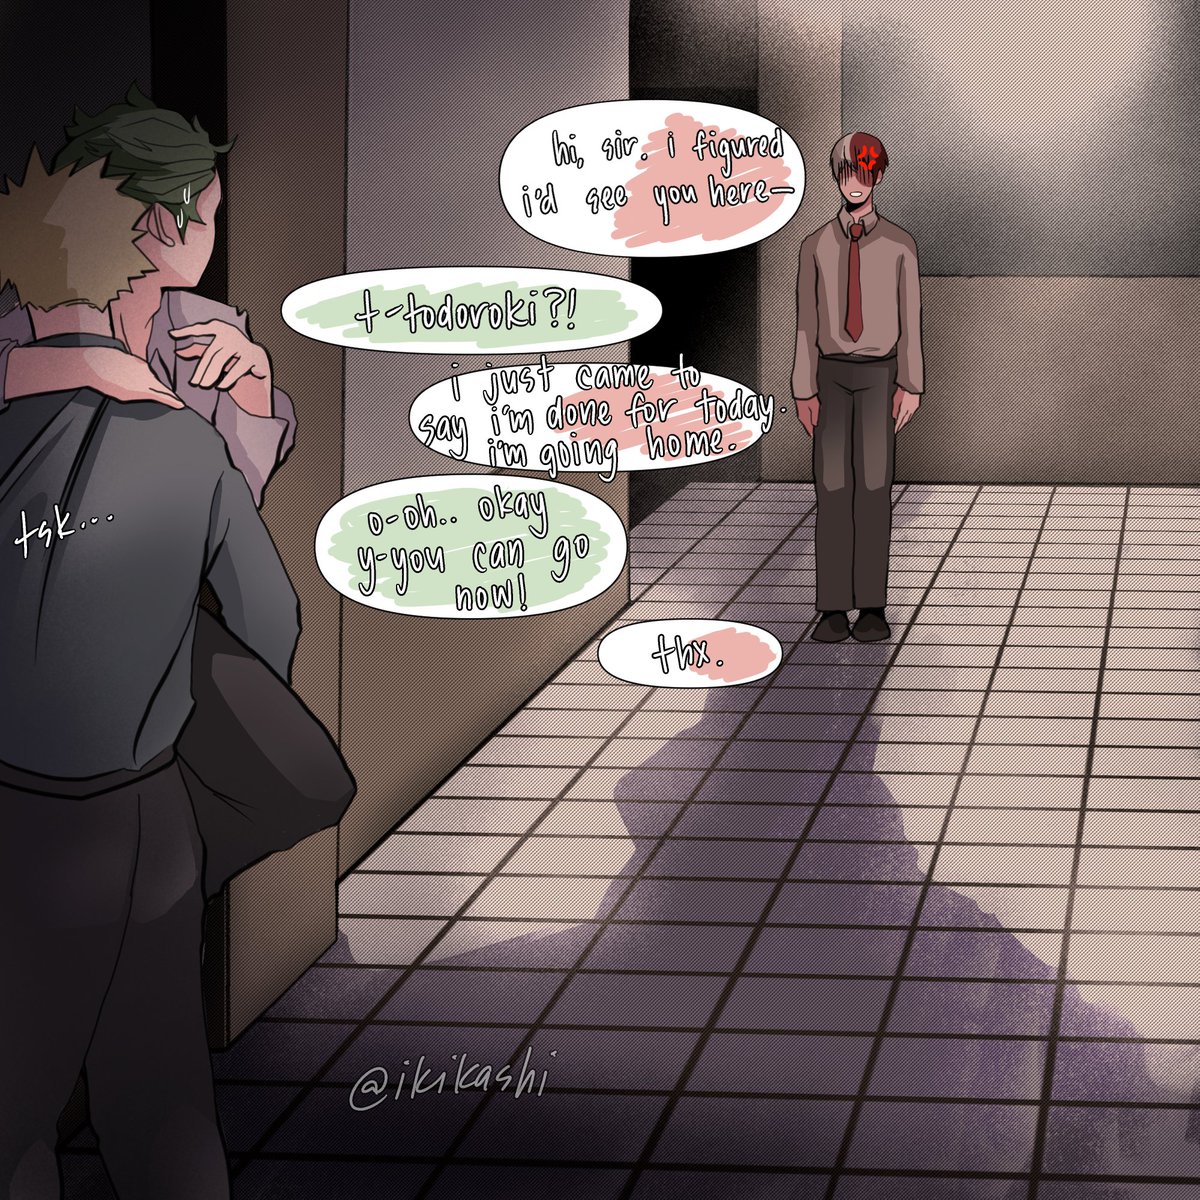 ceo!deku and assistant!bkg caught again by the one and only!! #bkdk #bakudeku